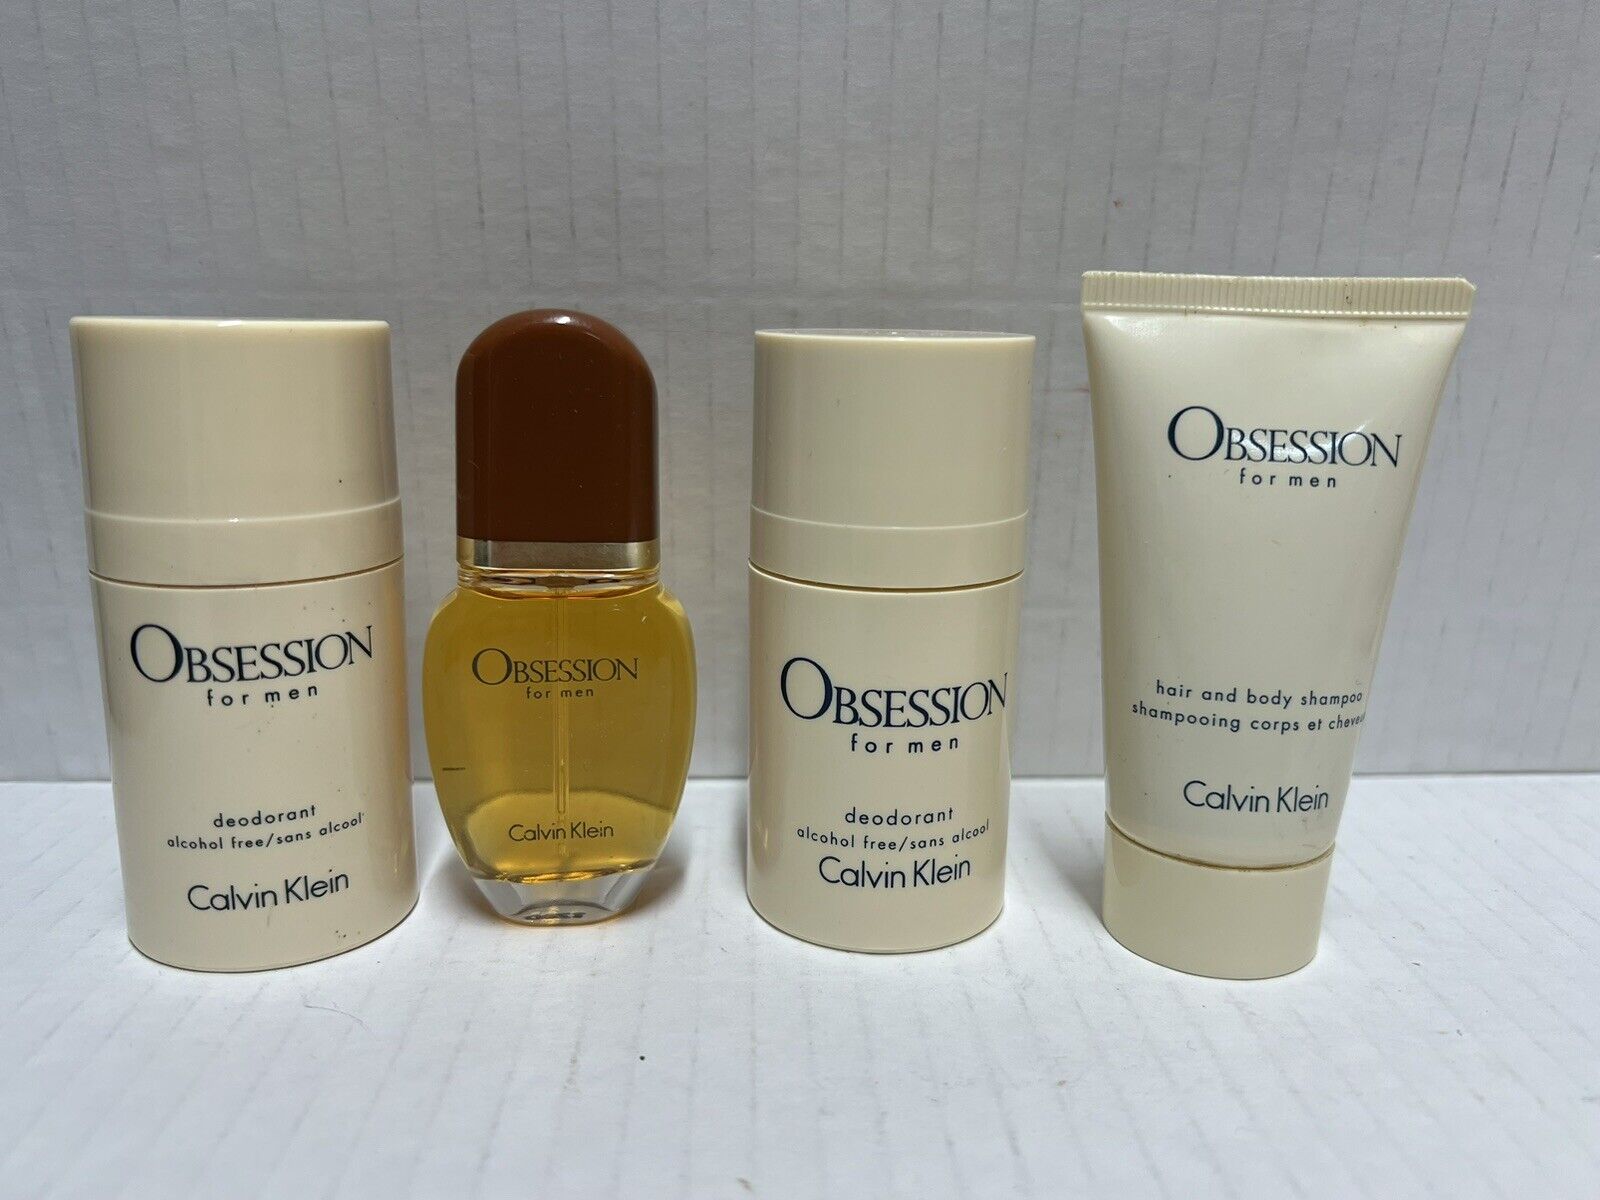 Obession for Men by Calvin Klein CK Travel Size Mini set of 4 EDT Deodorant Gel